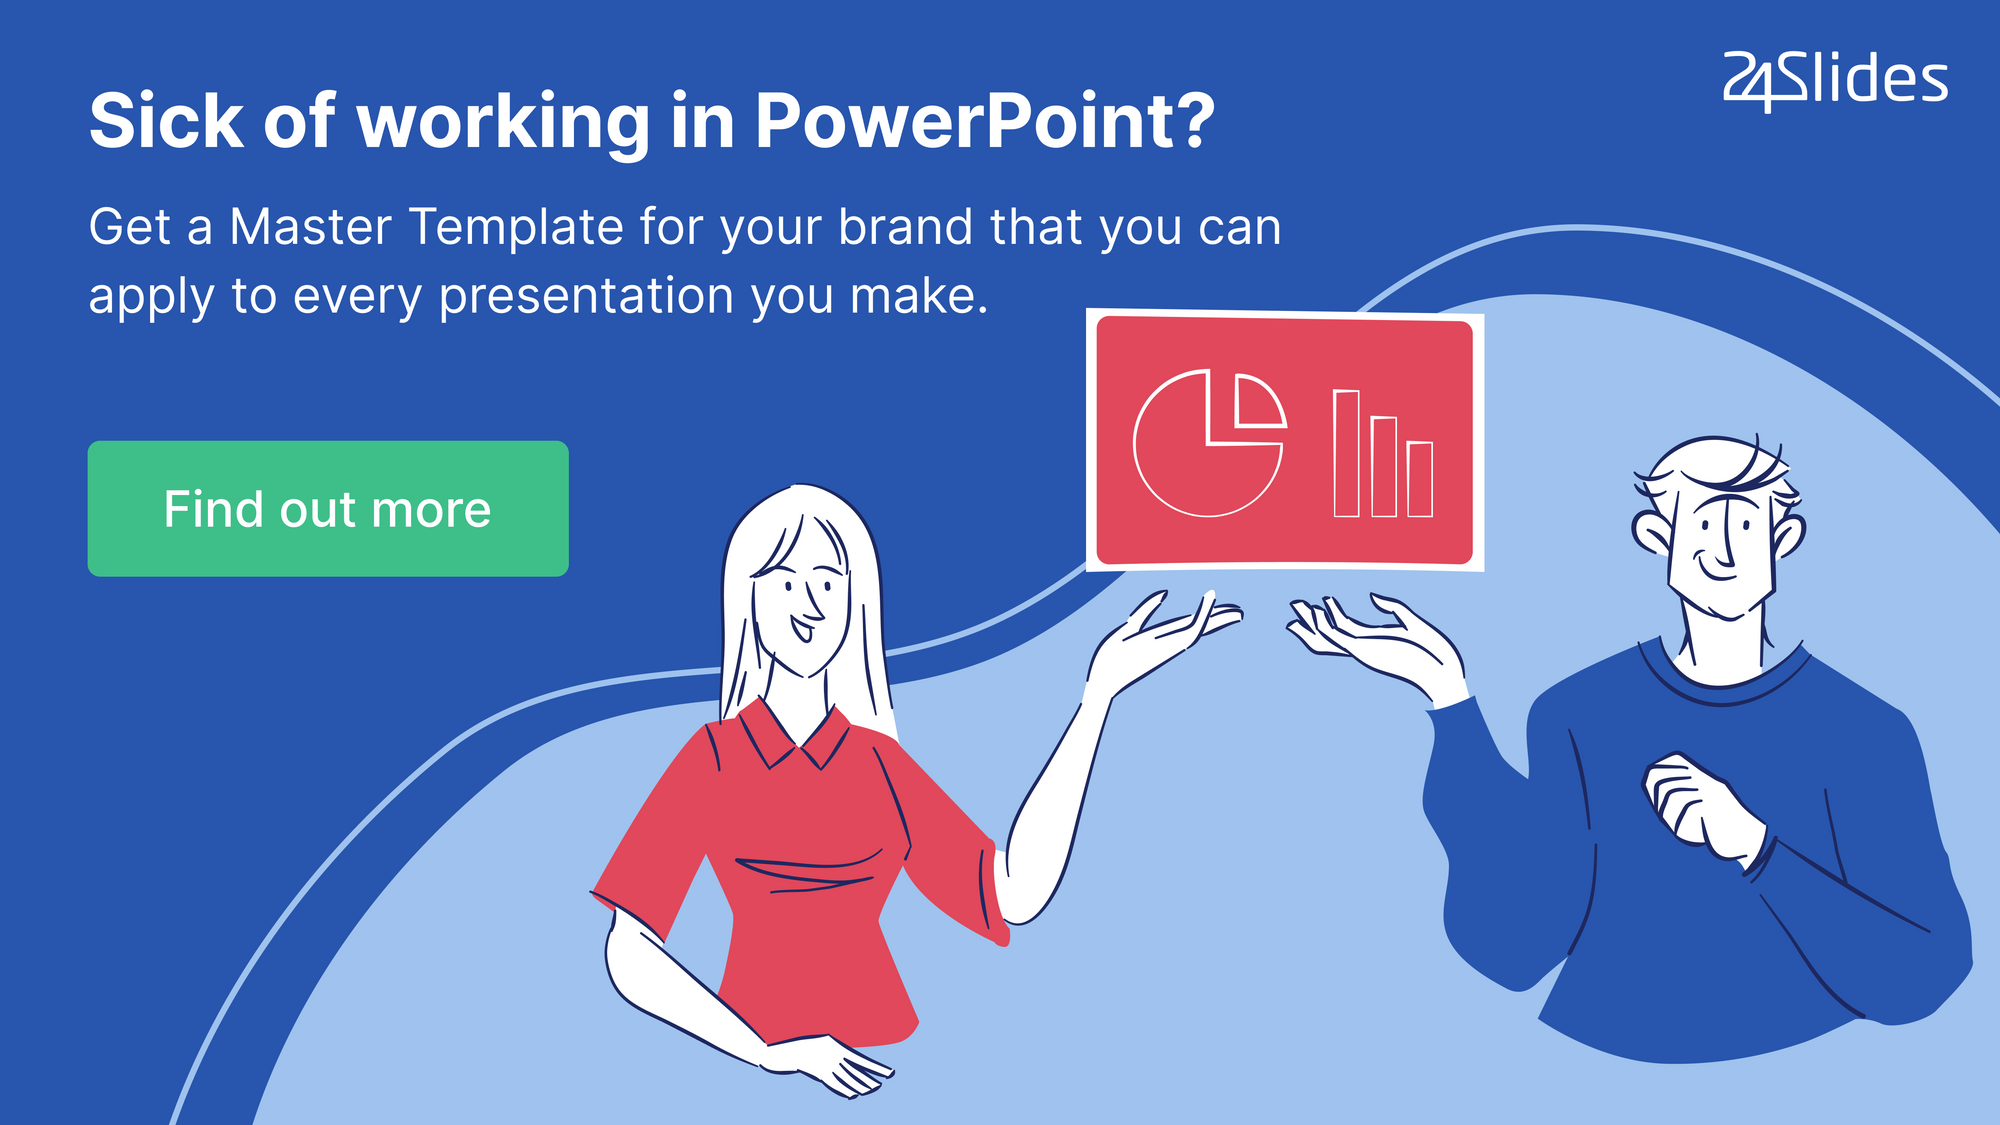 15 Fun and Colorful Free PowerPoint Templates